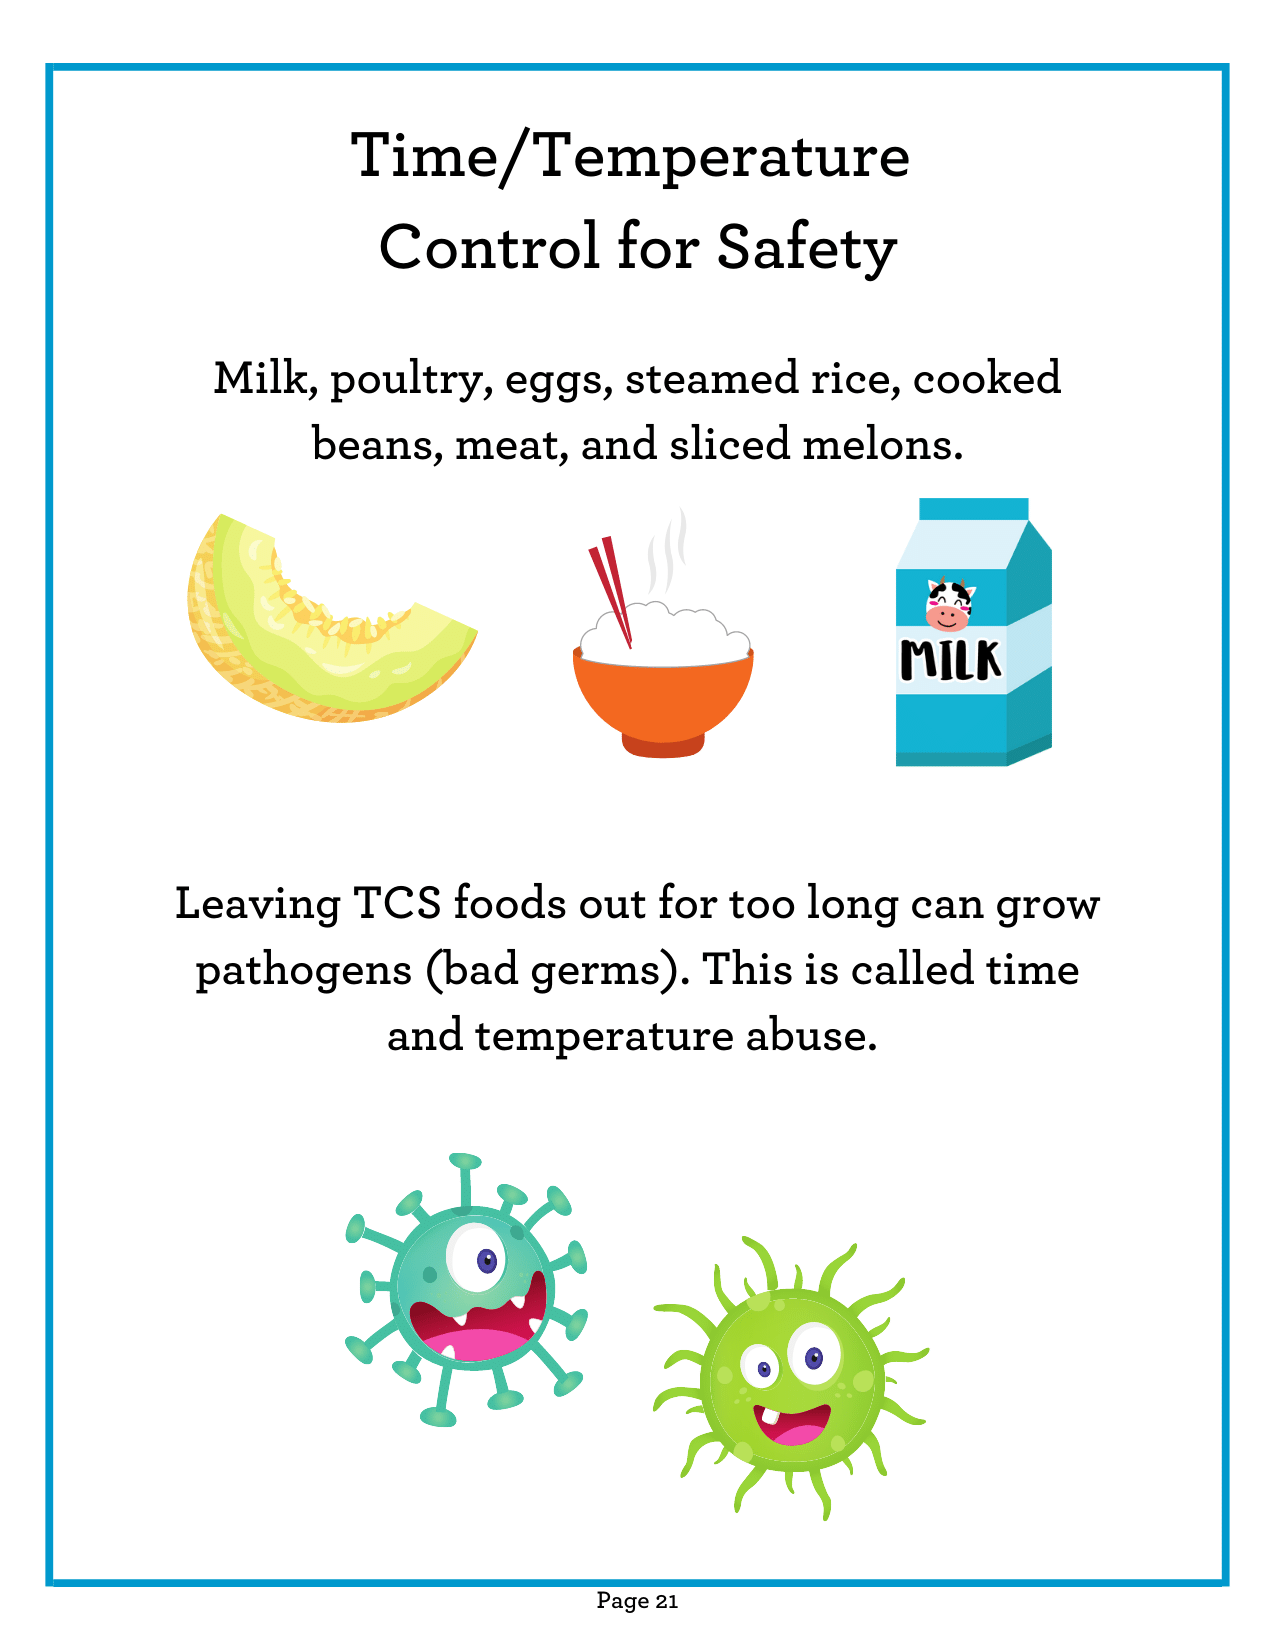 What Food Items Need Time and Temperature Control for Safety